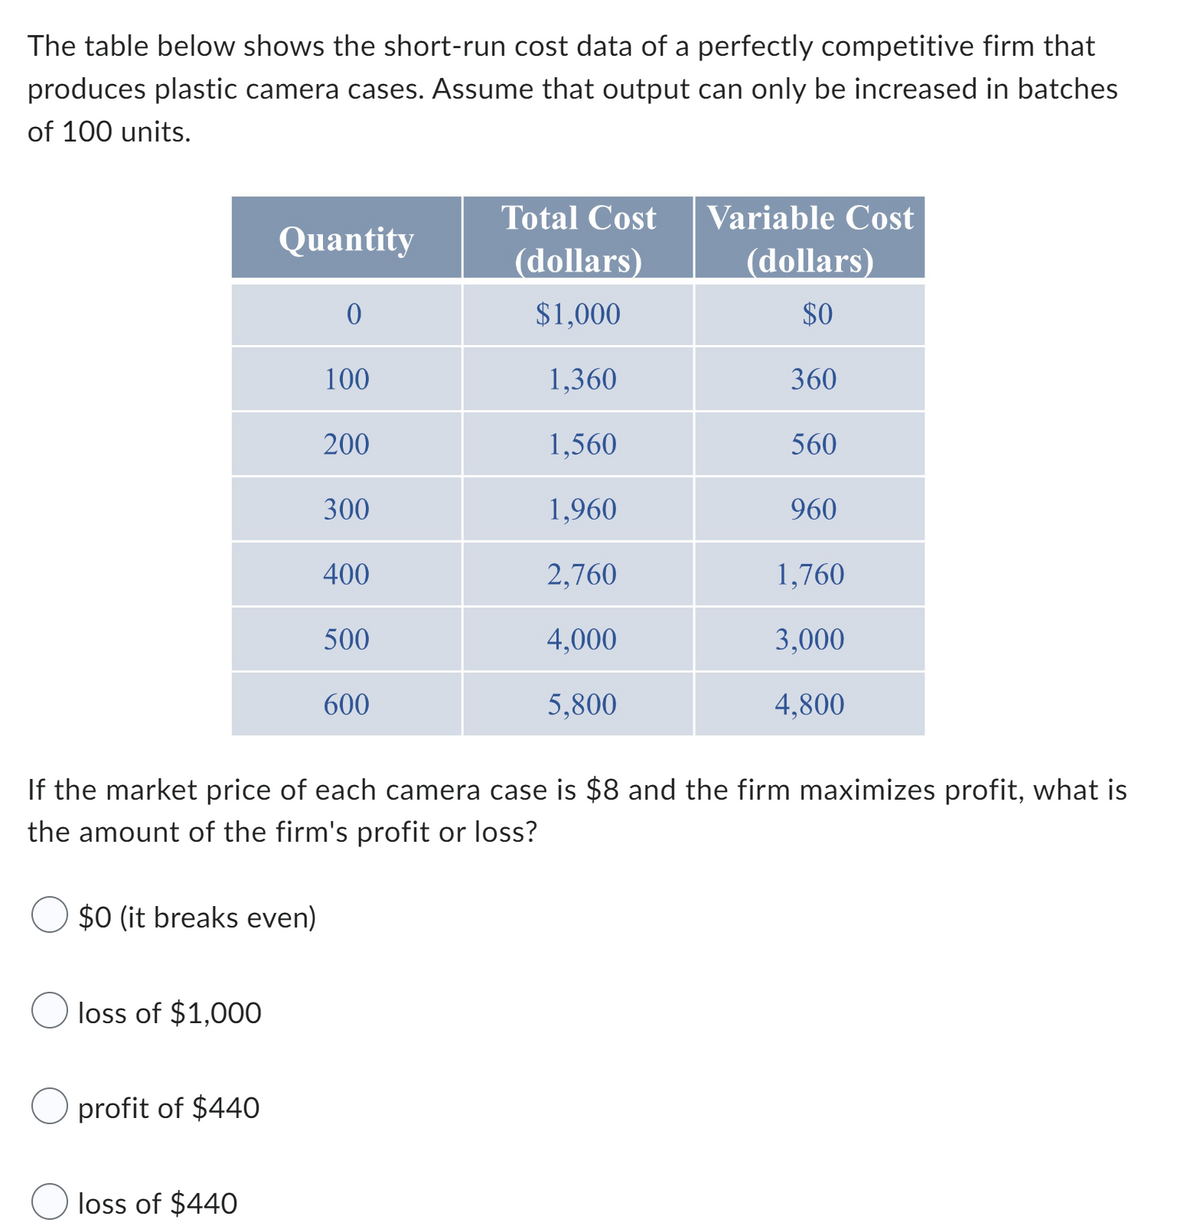 The table below shows the short-run cost data of a perfectly competitive firm that
produces plastic camera cases. Assume that output can only be increased in batches
of 100 units.
$0 (it breaks even)
loss of $1,000
Quantity
profit of $440
loss of $440
100
200
300
400
500
600
Total Cost
(dollars)
$1,000
1,360
1,560
1,960
2,760
4,000
5,800
Variable Cost
(dollars)
$0
360
If the market price of each camera case is $8 and the firm maximizes profit, what is
the amount of the firm's profit or loss?
560
960
1,760
3,000
4,800